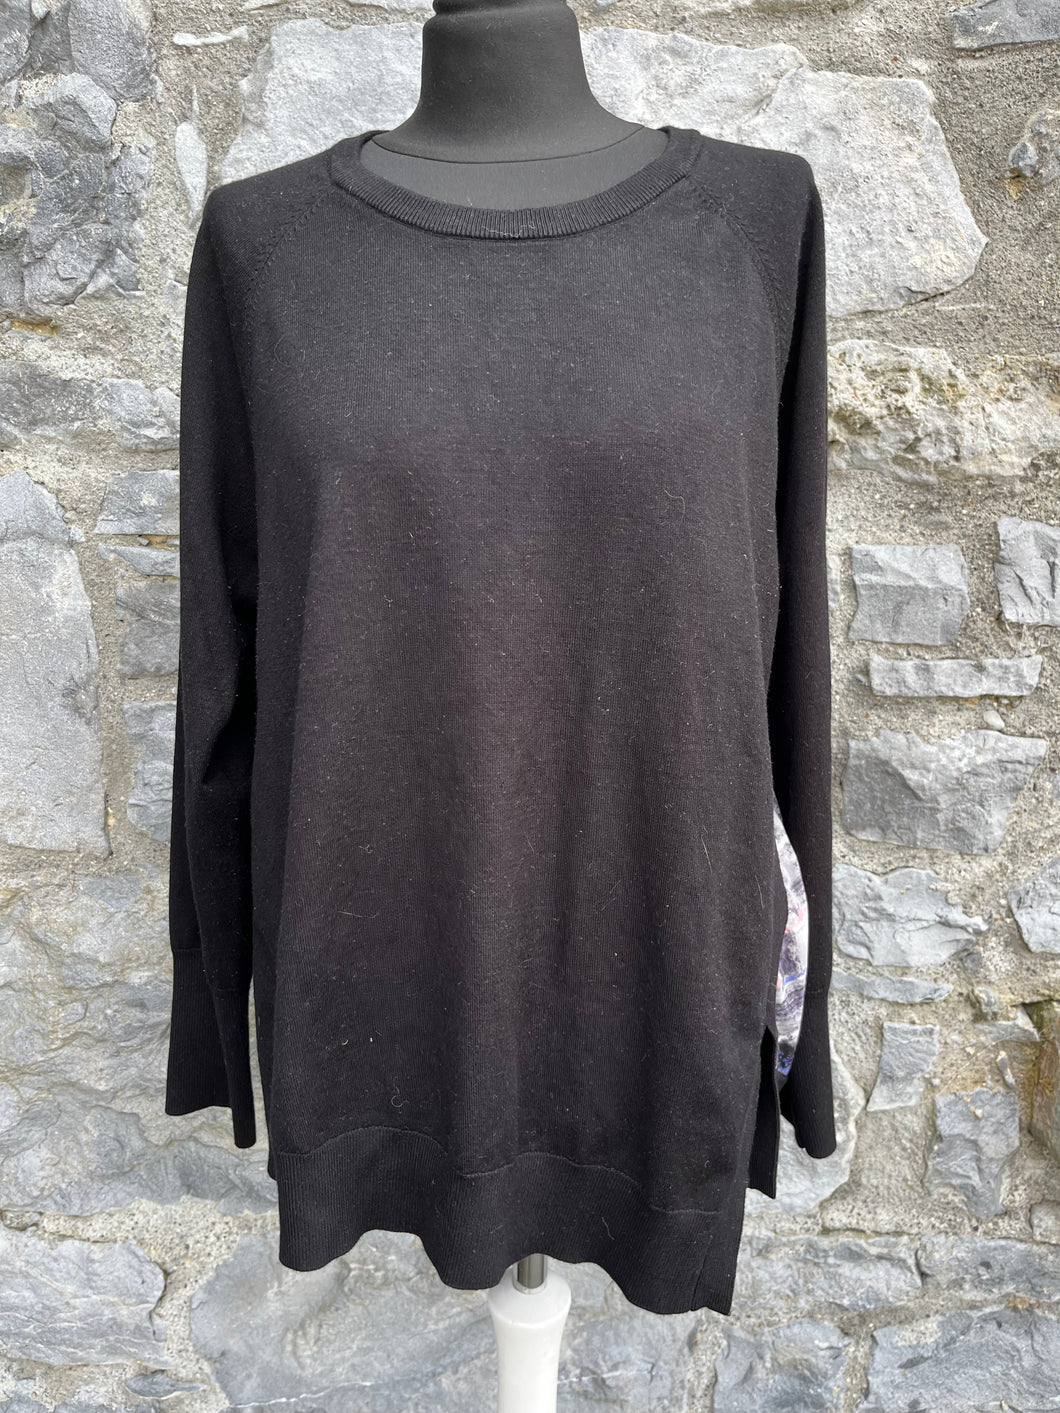 DKNY two tone top uk 12-14